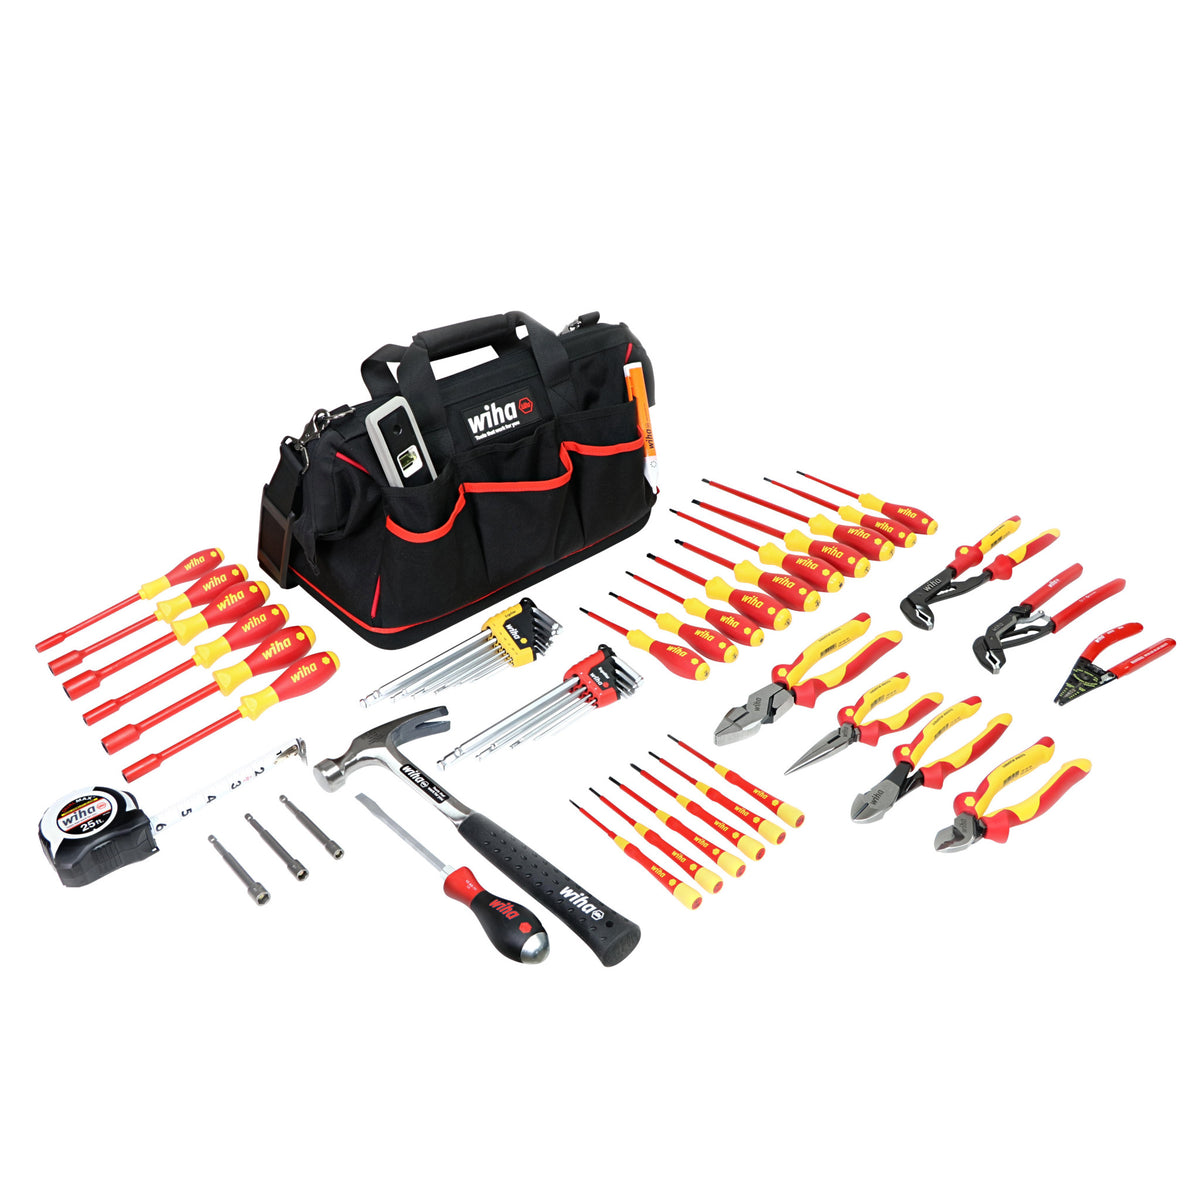 Wiha 32937 59 Piece Master Electrician's Insulated Tool Set in Canvas Tool Bag